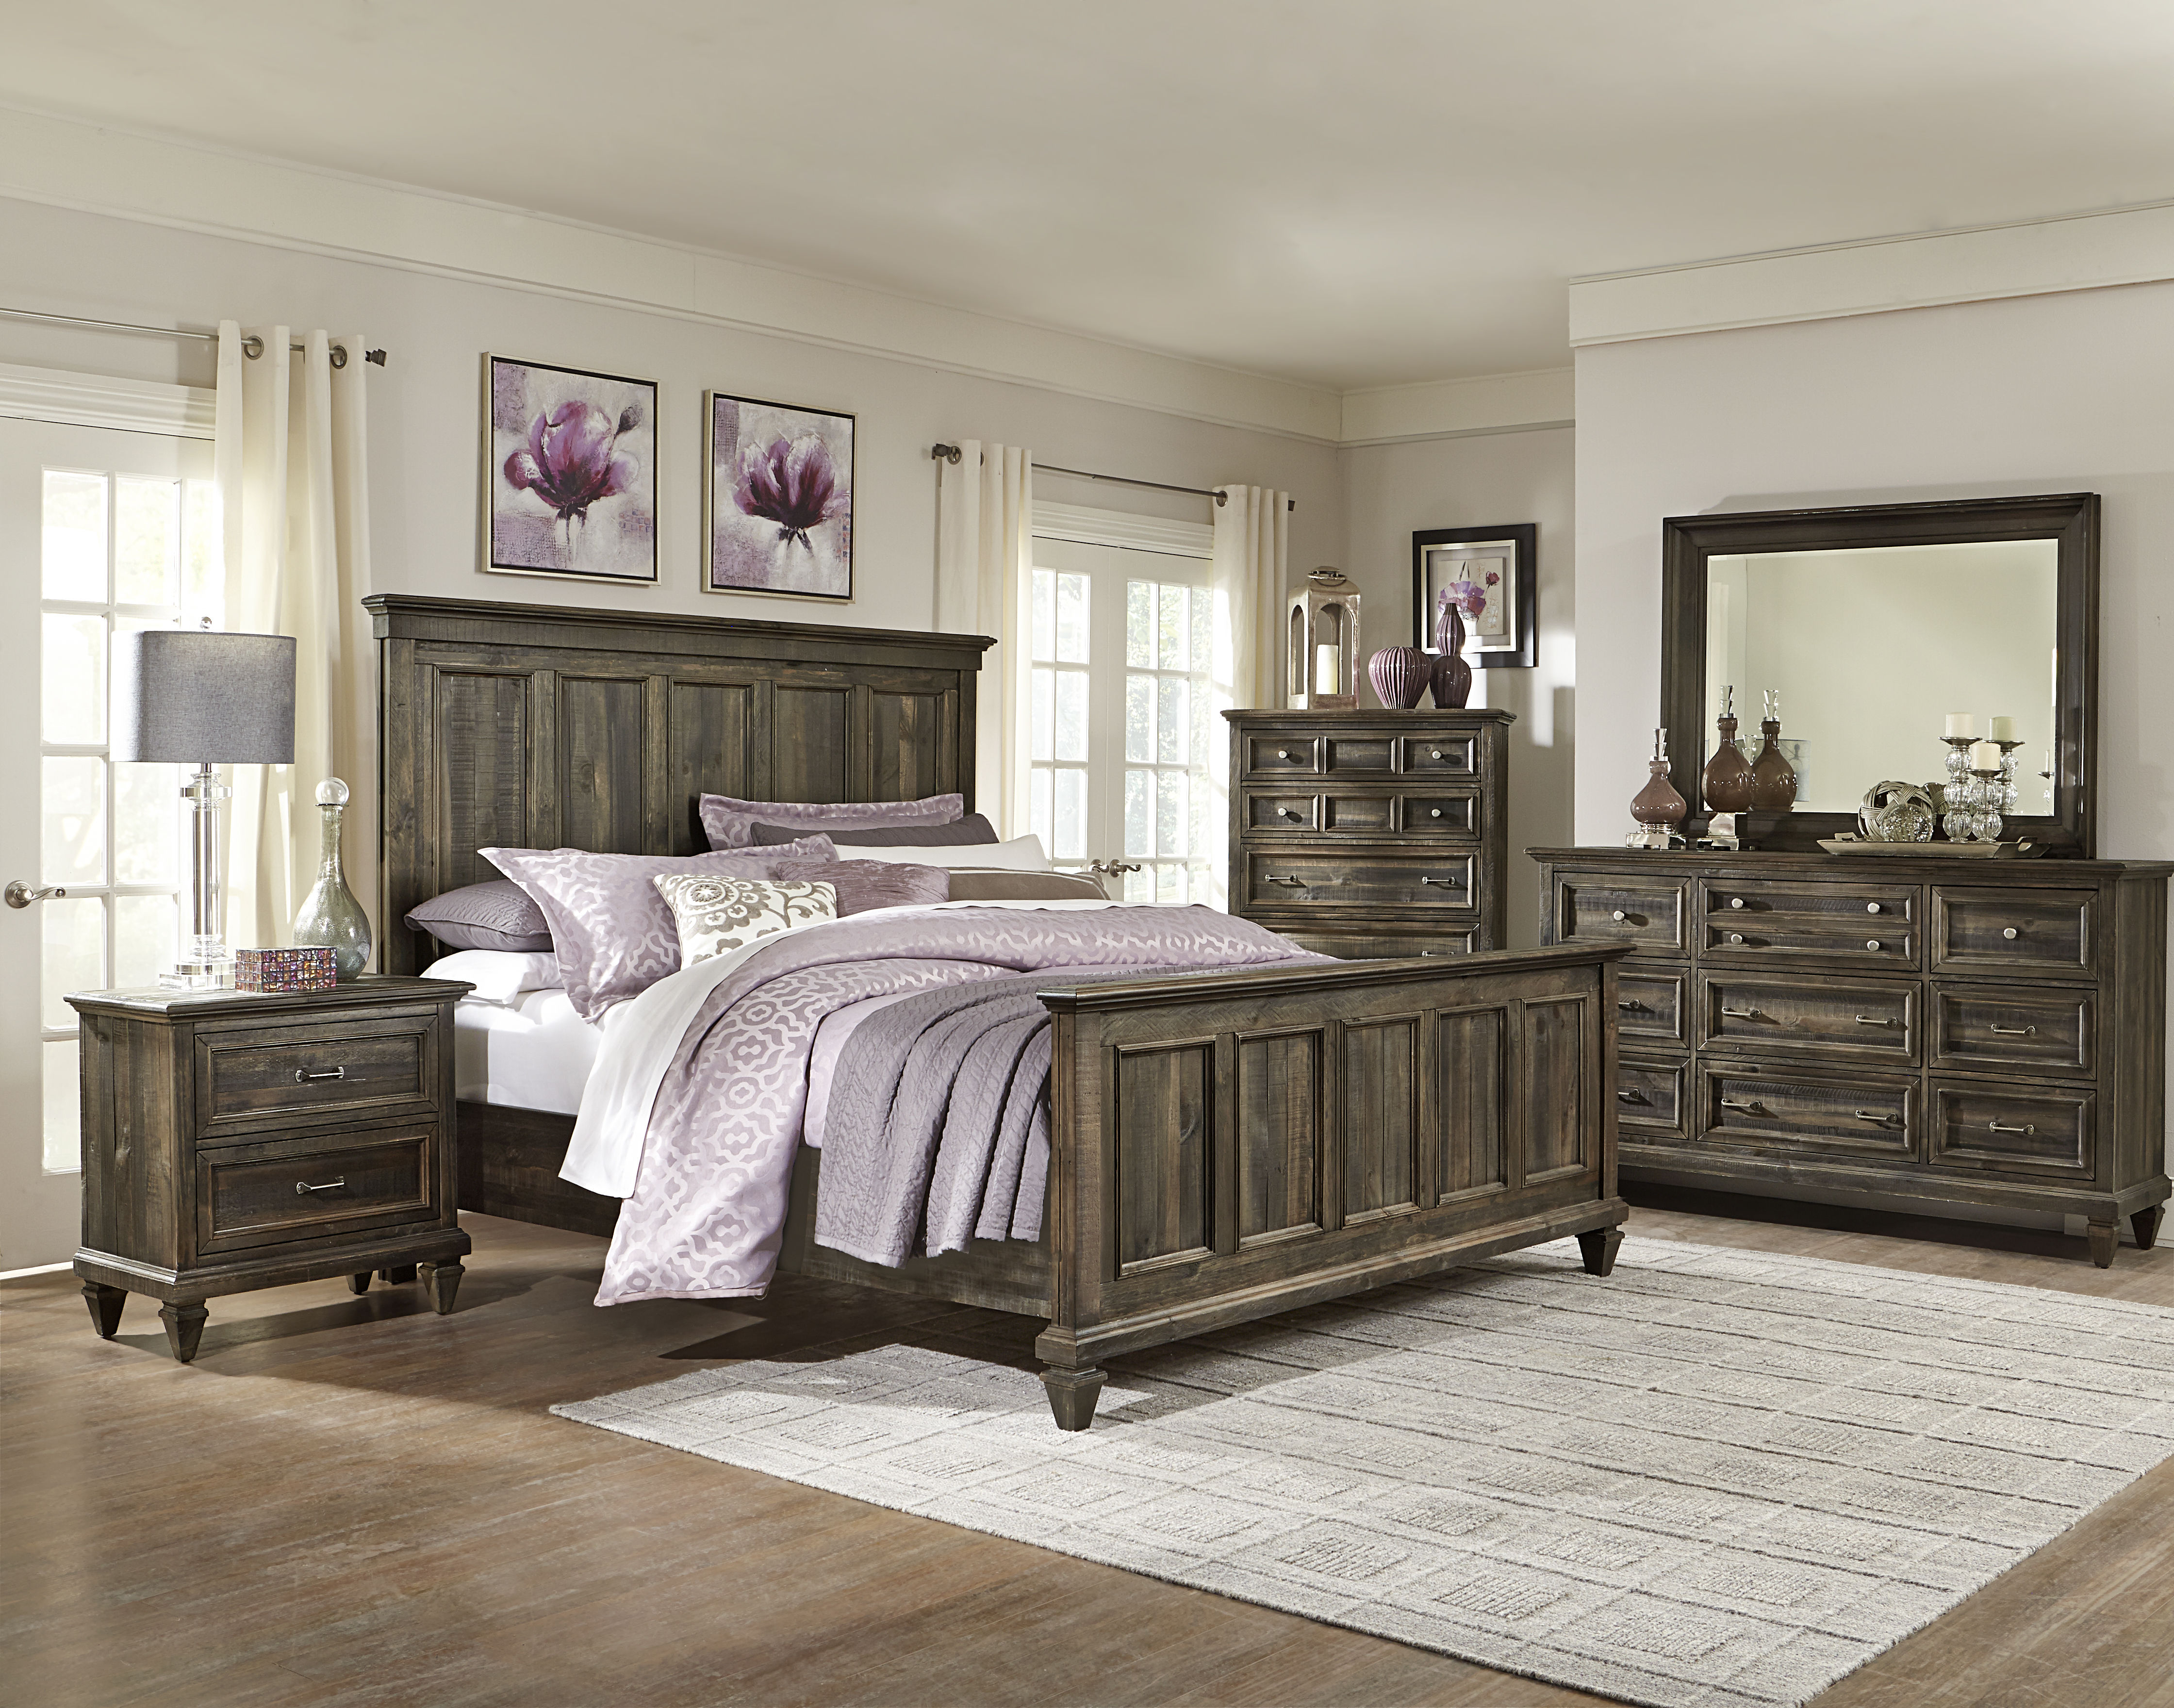 Weathered Wood Bedroom Set Home Design Ideas inside dimensions 4480 X 3520